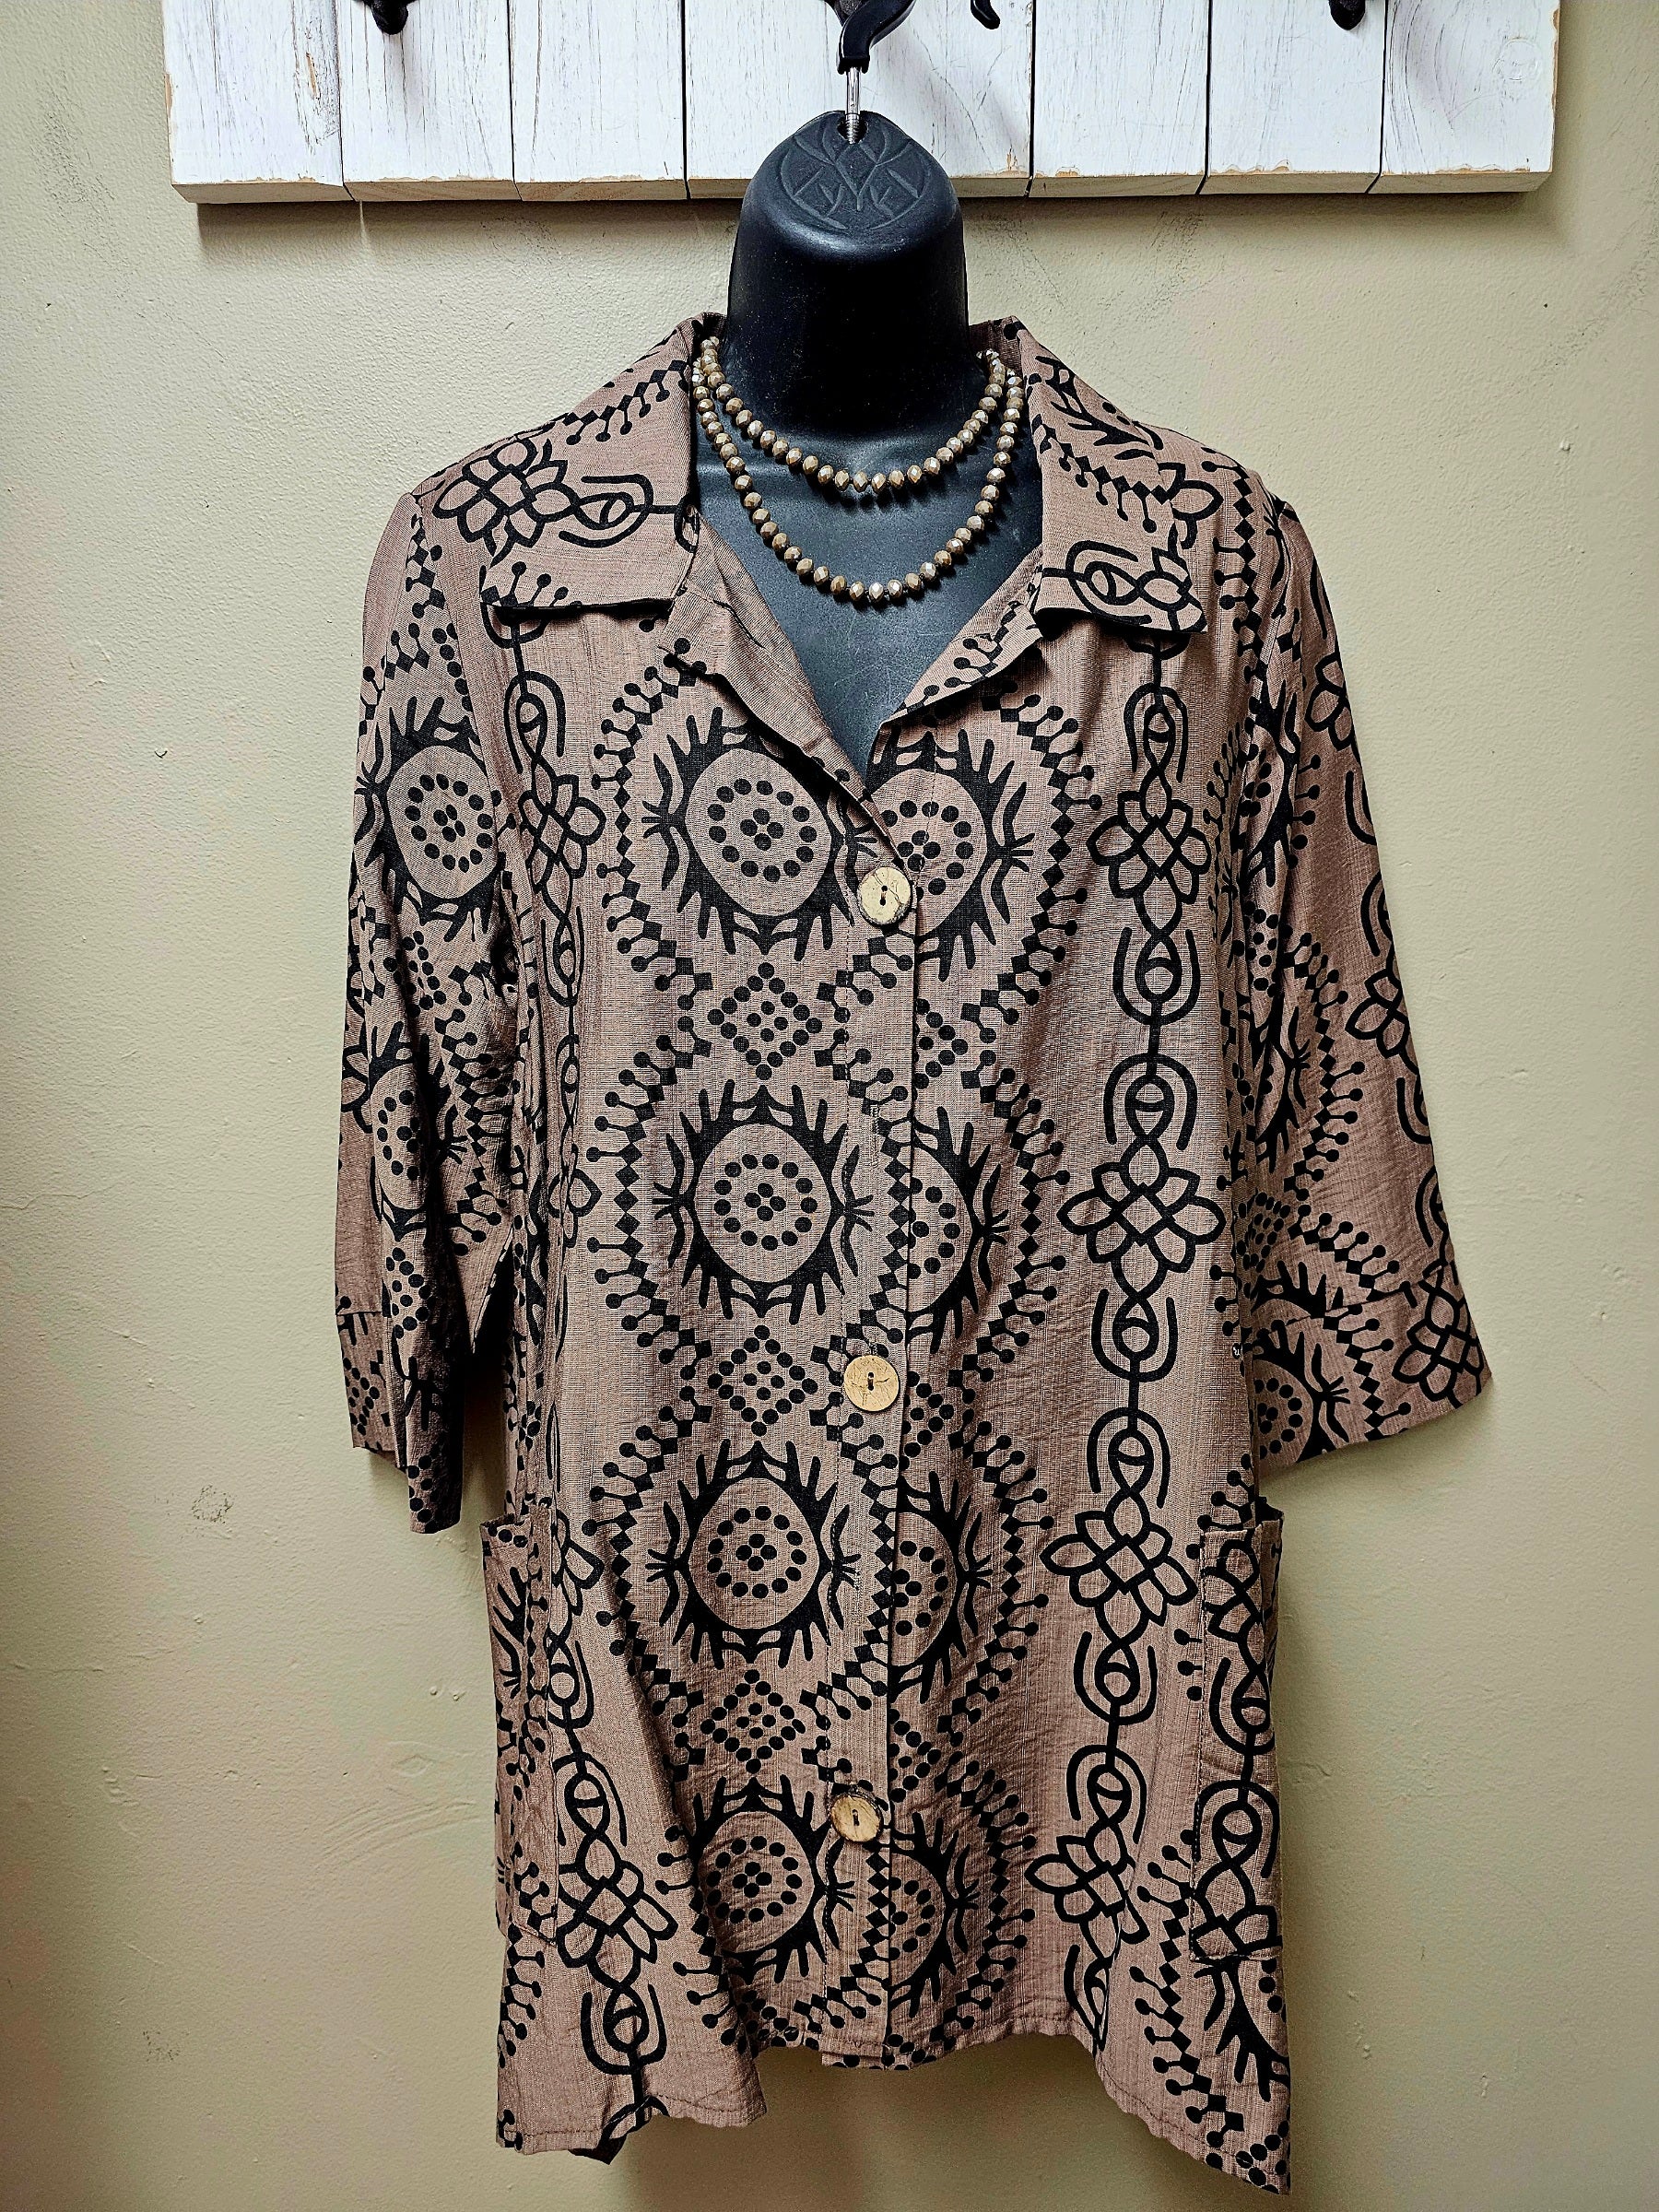 Classic Mocha Button Up Top with 3/4 Sleeves